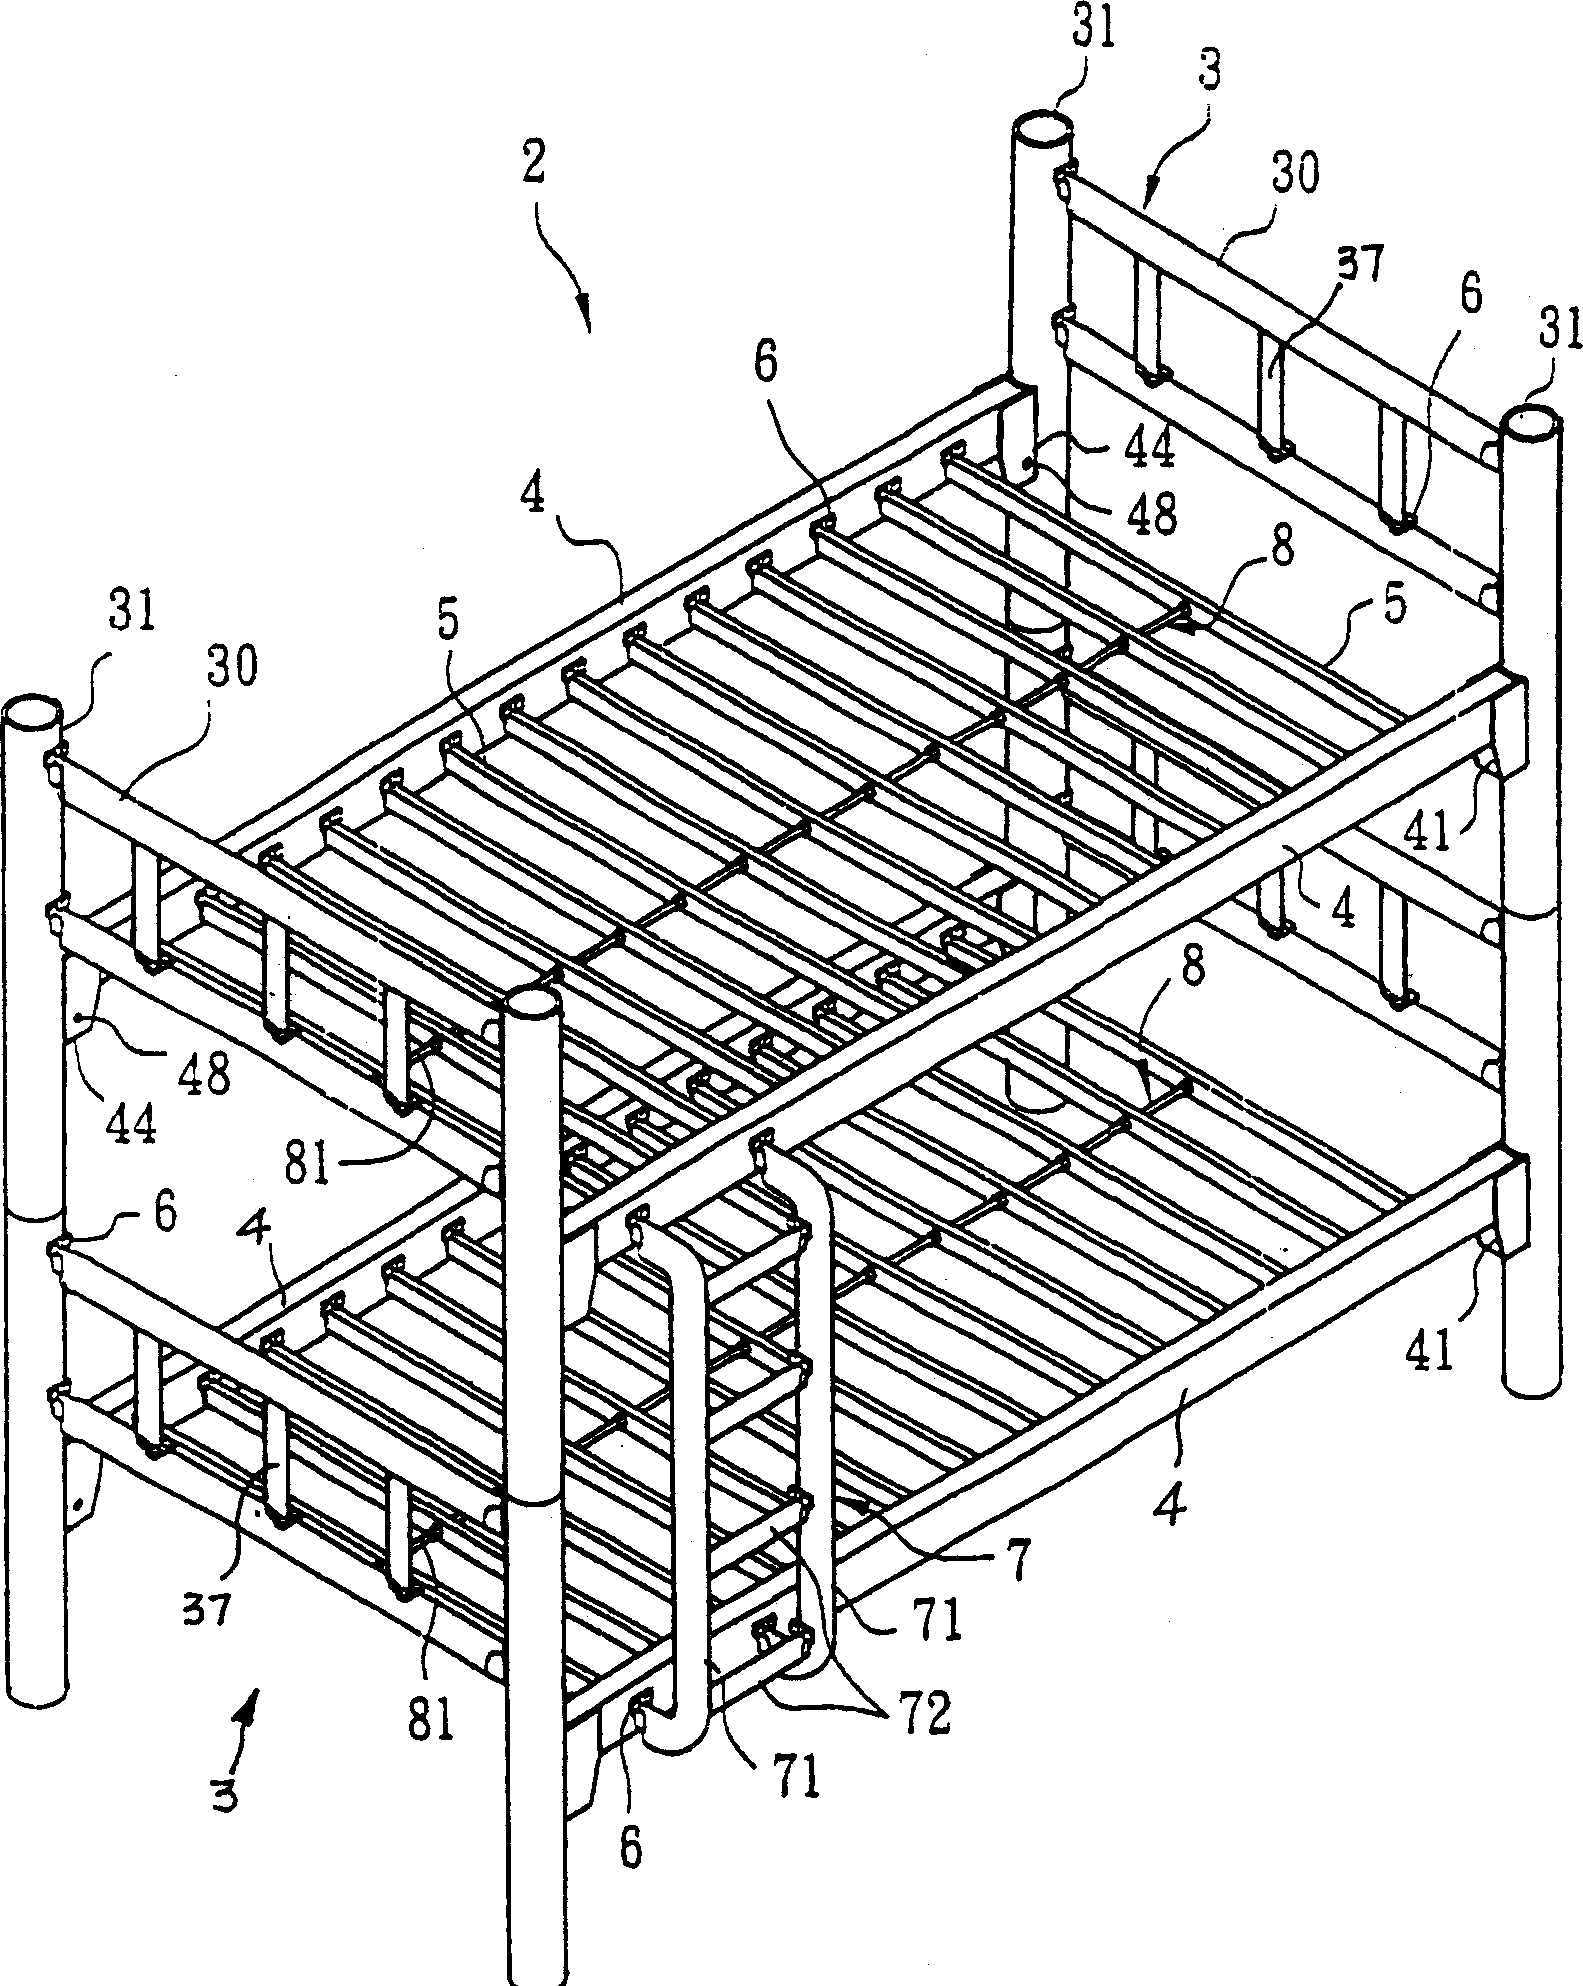 Embedded combined bedstead